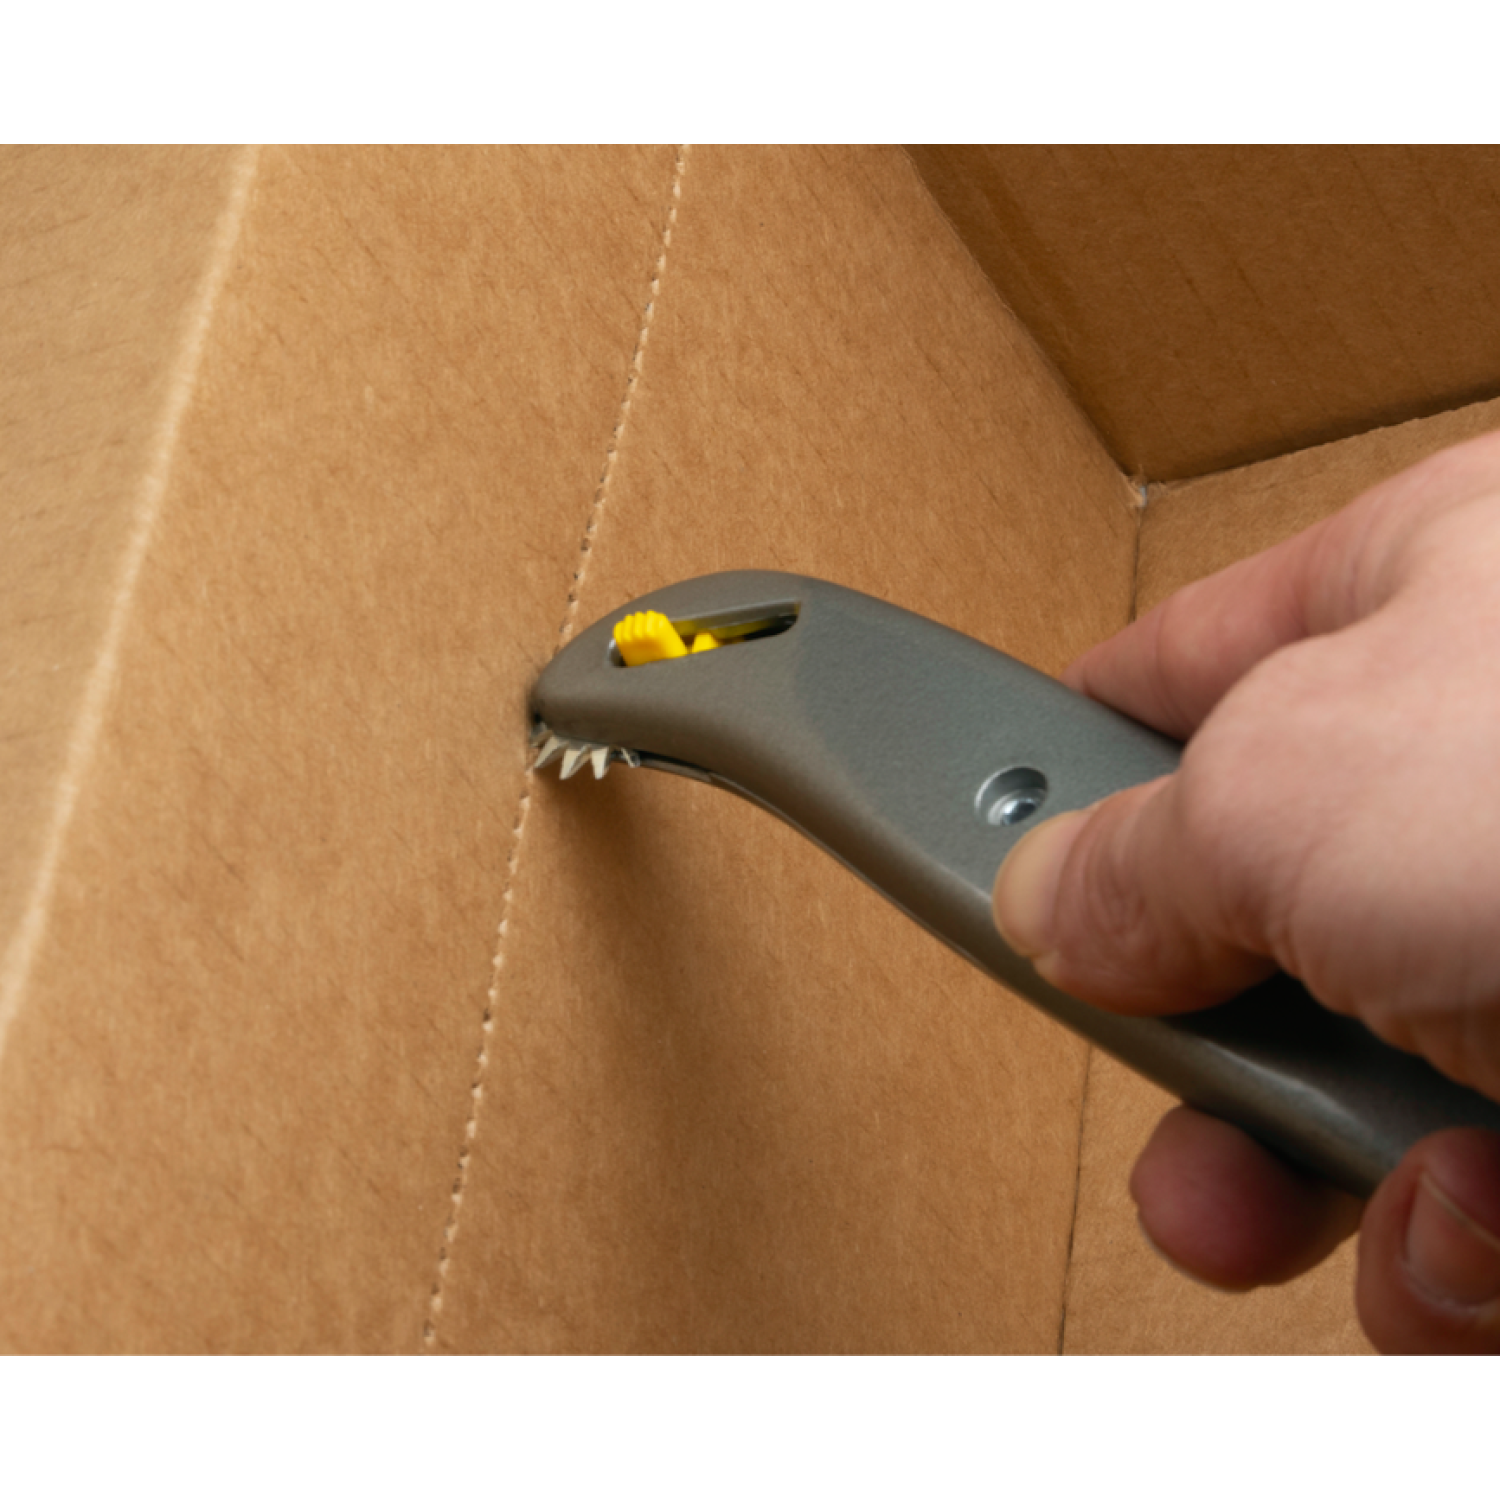 IDL-190 HD Retractable Box Cutter with Scoring Wheel buy in stock